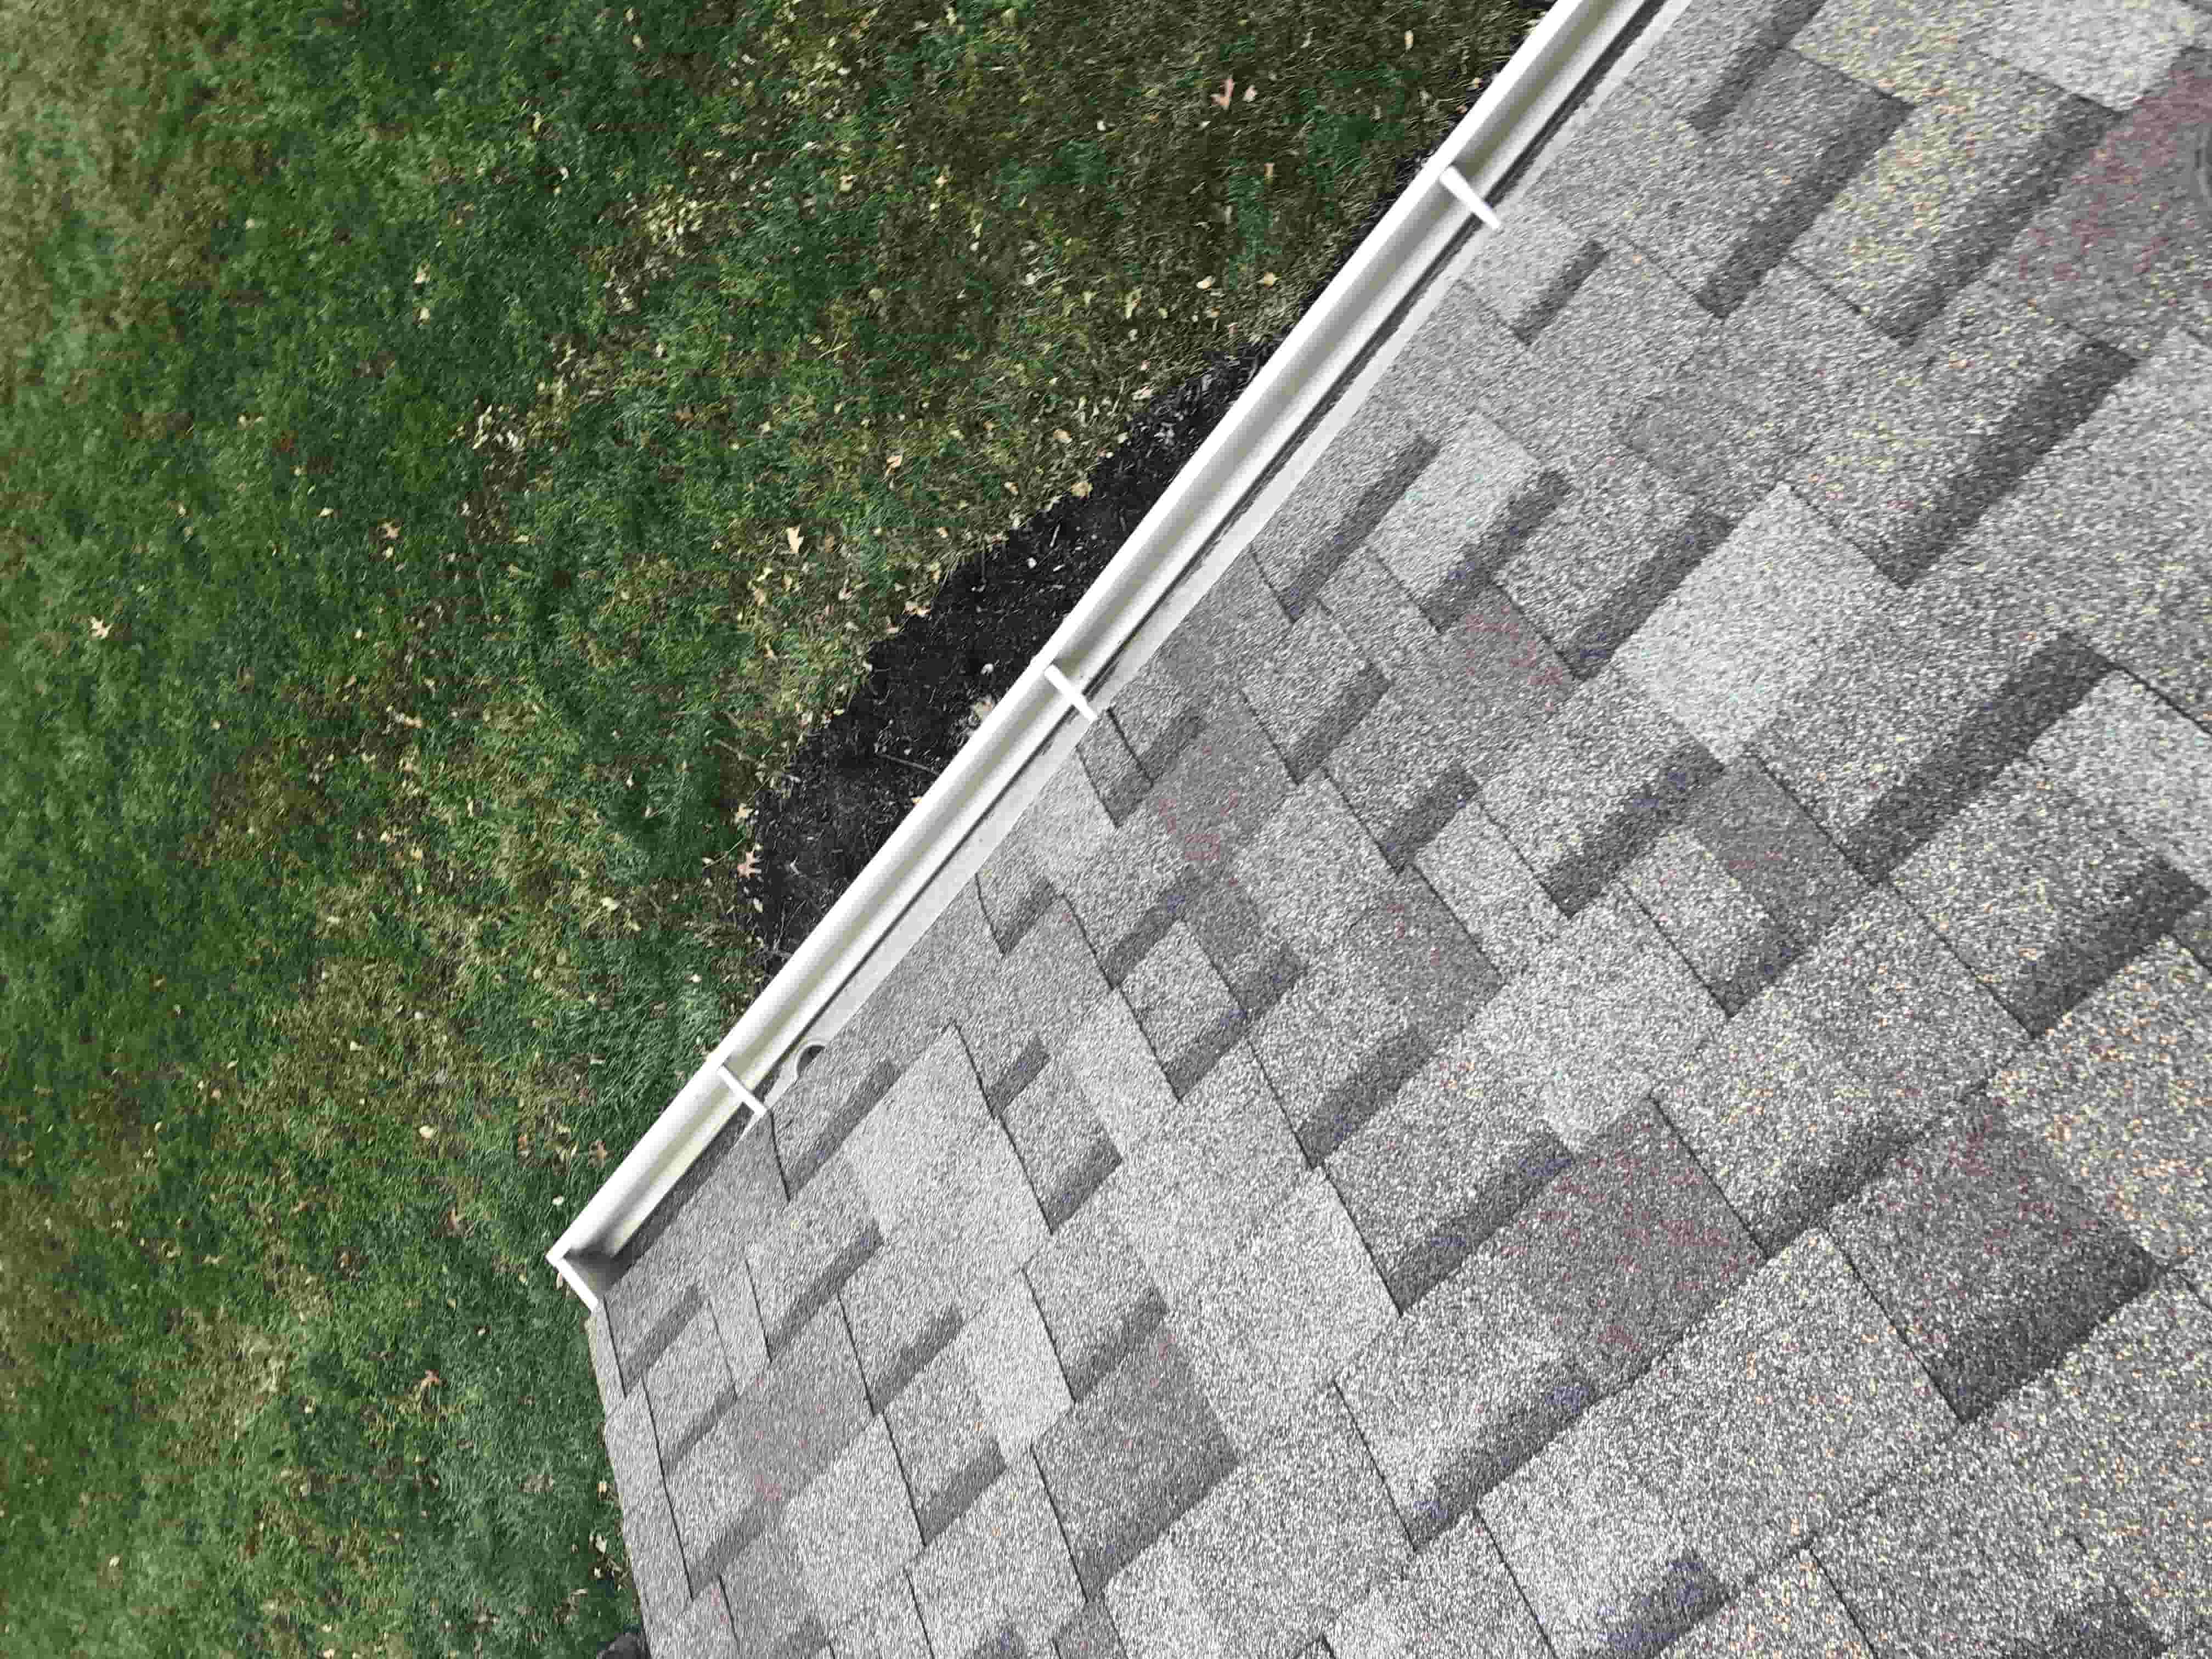 diy gutter cleaning from the ground